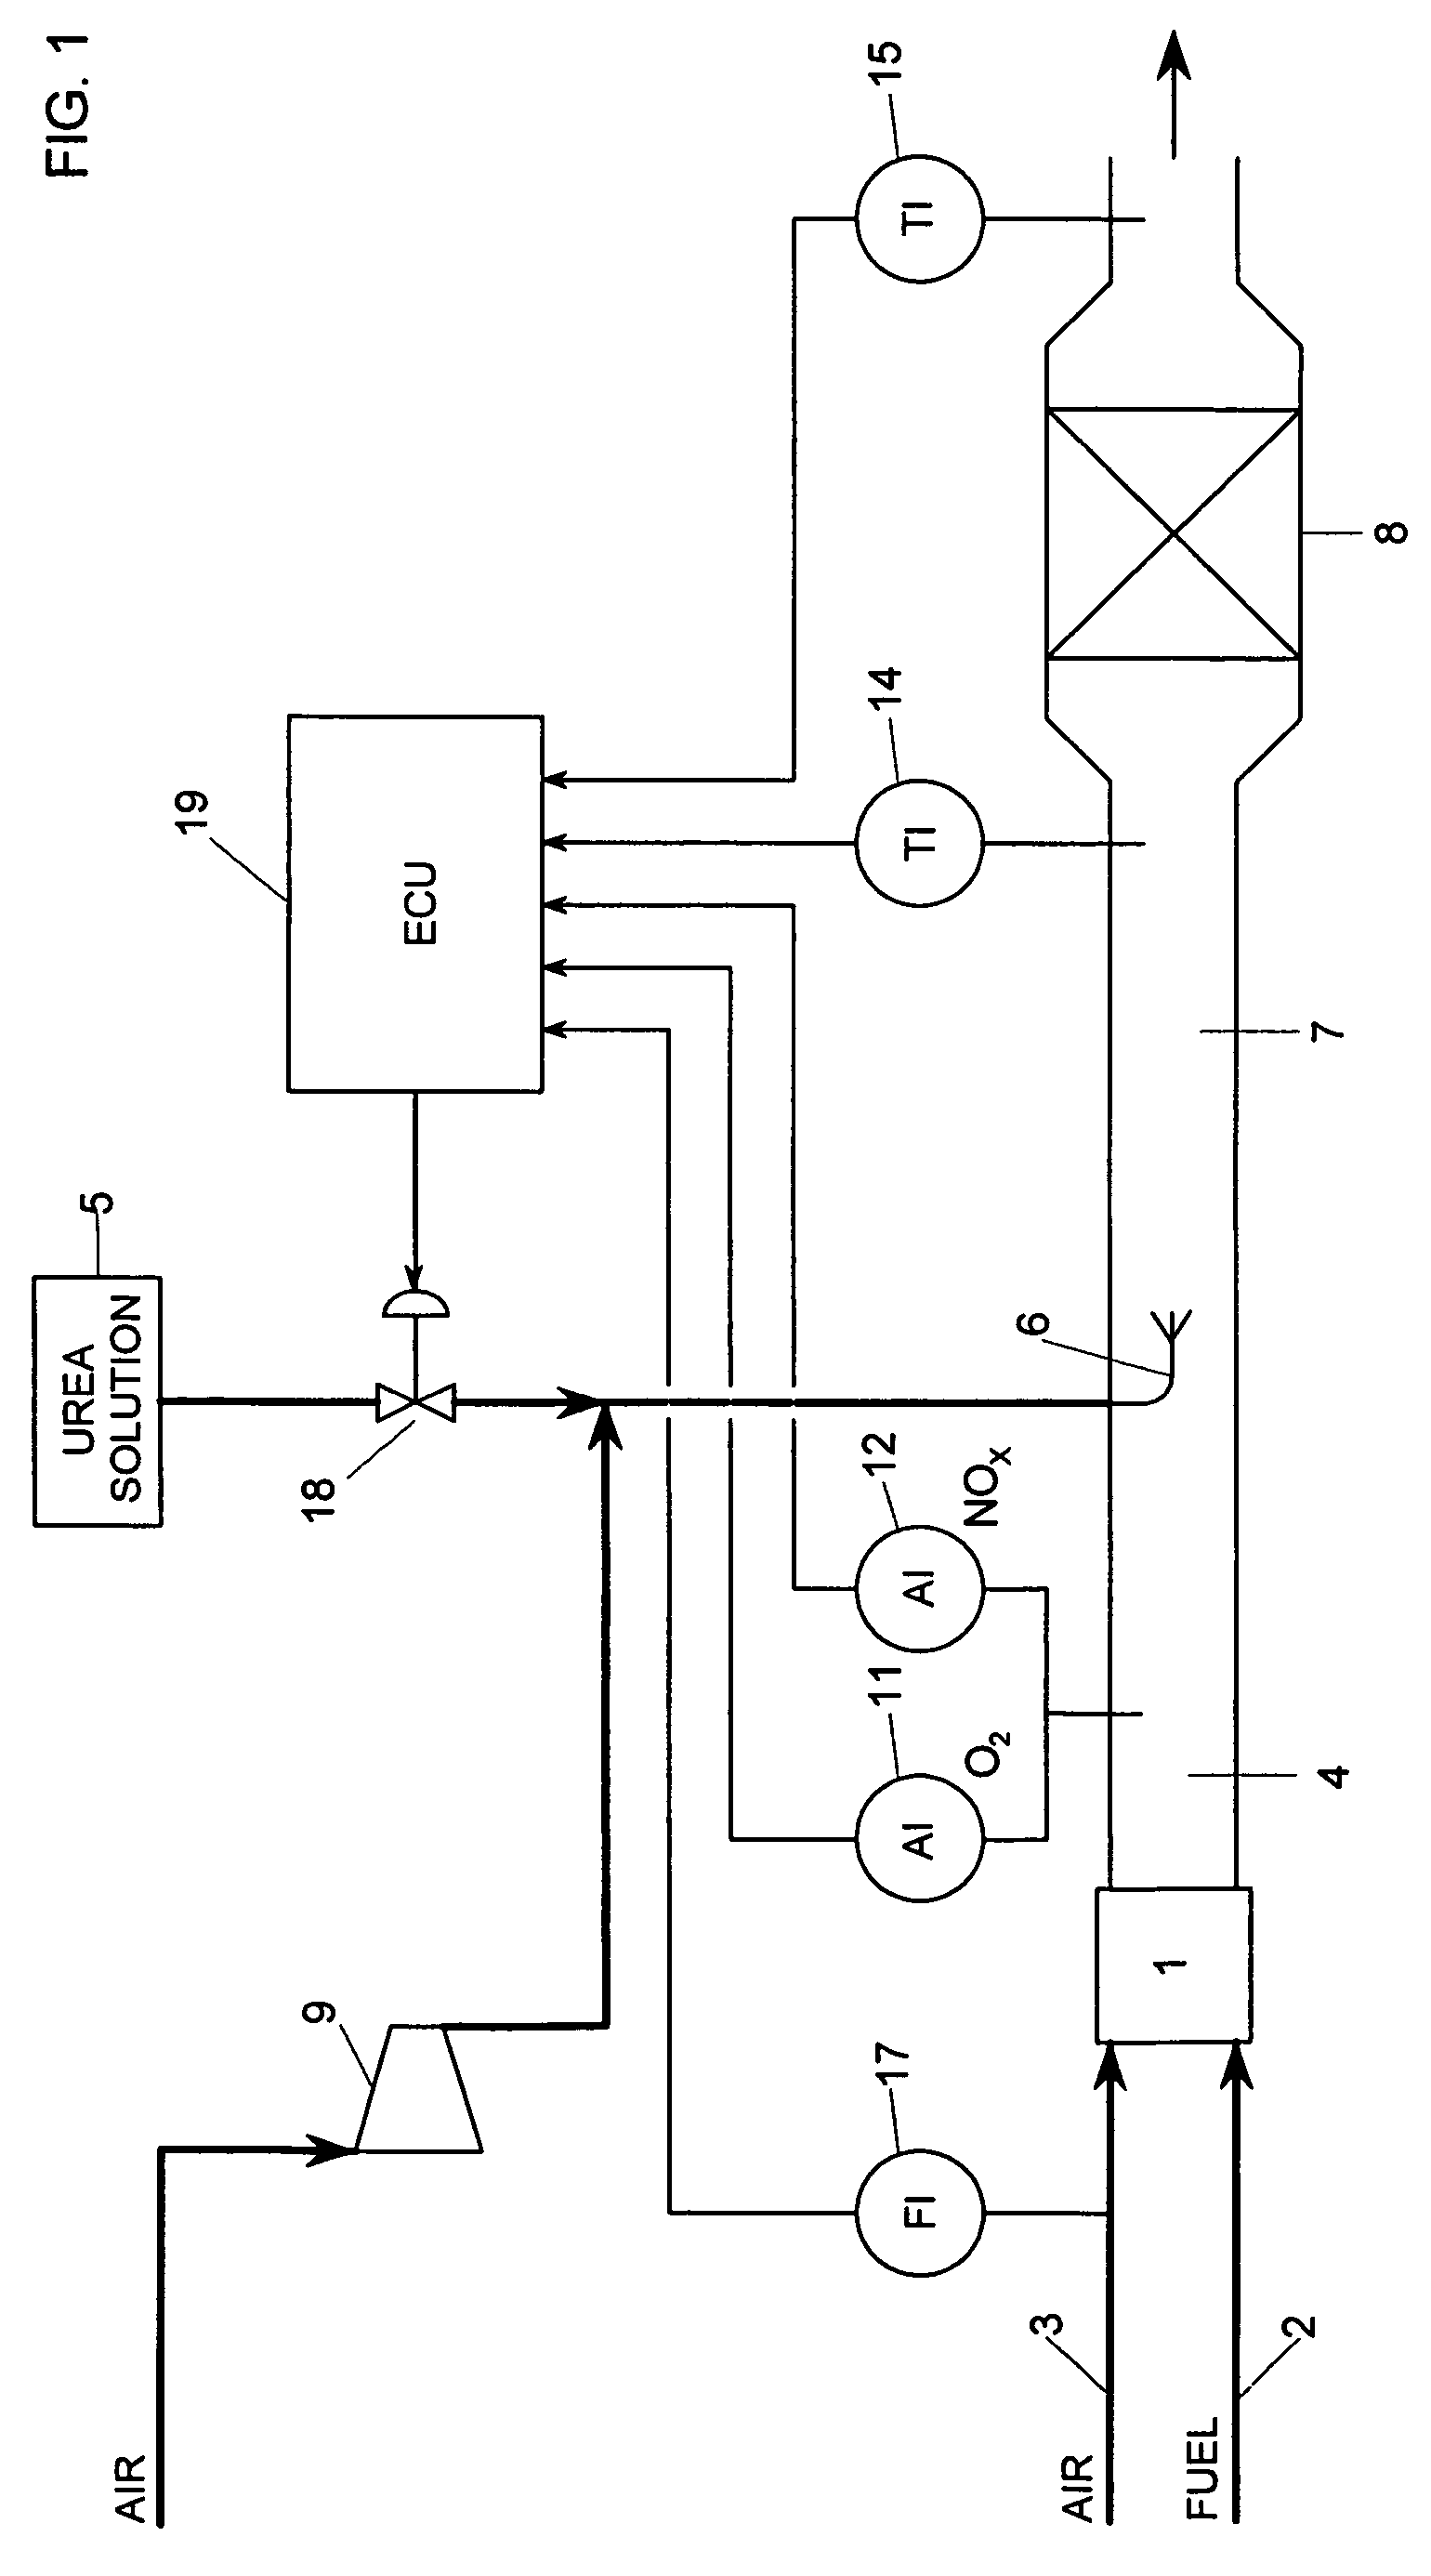 Method for controlling injection of reducing agent in exhaust gas from a combustion engine